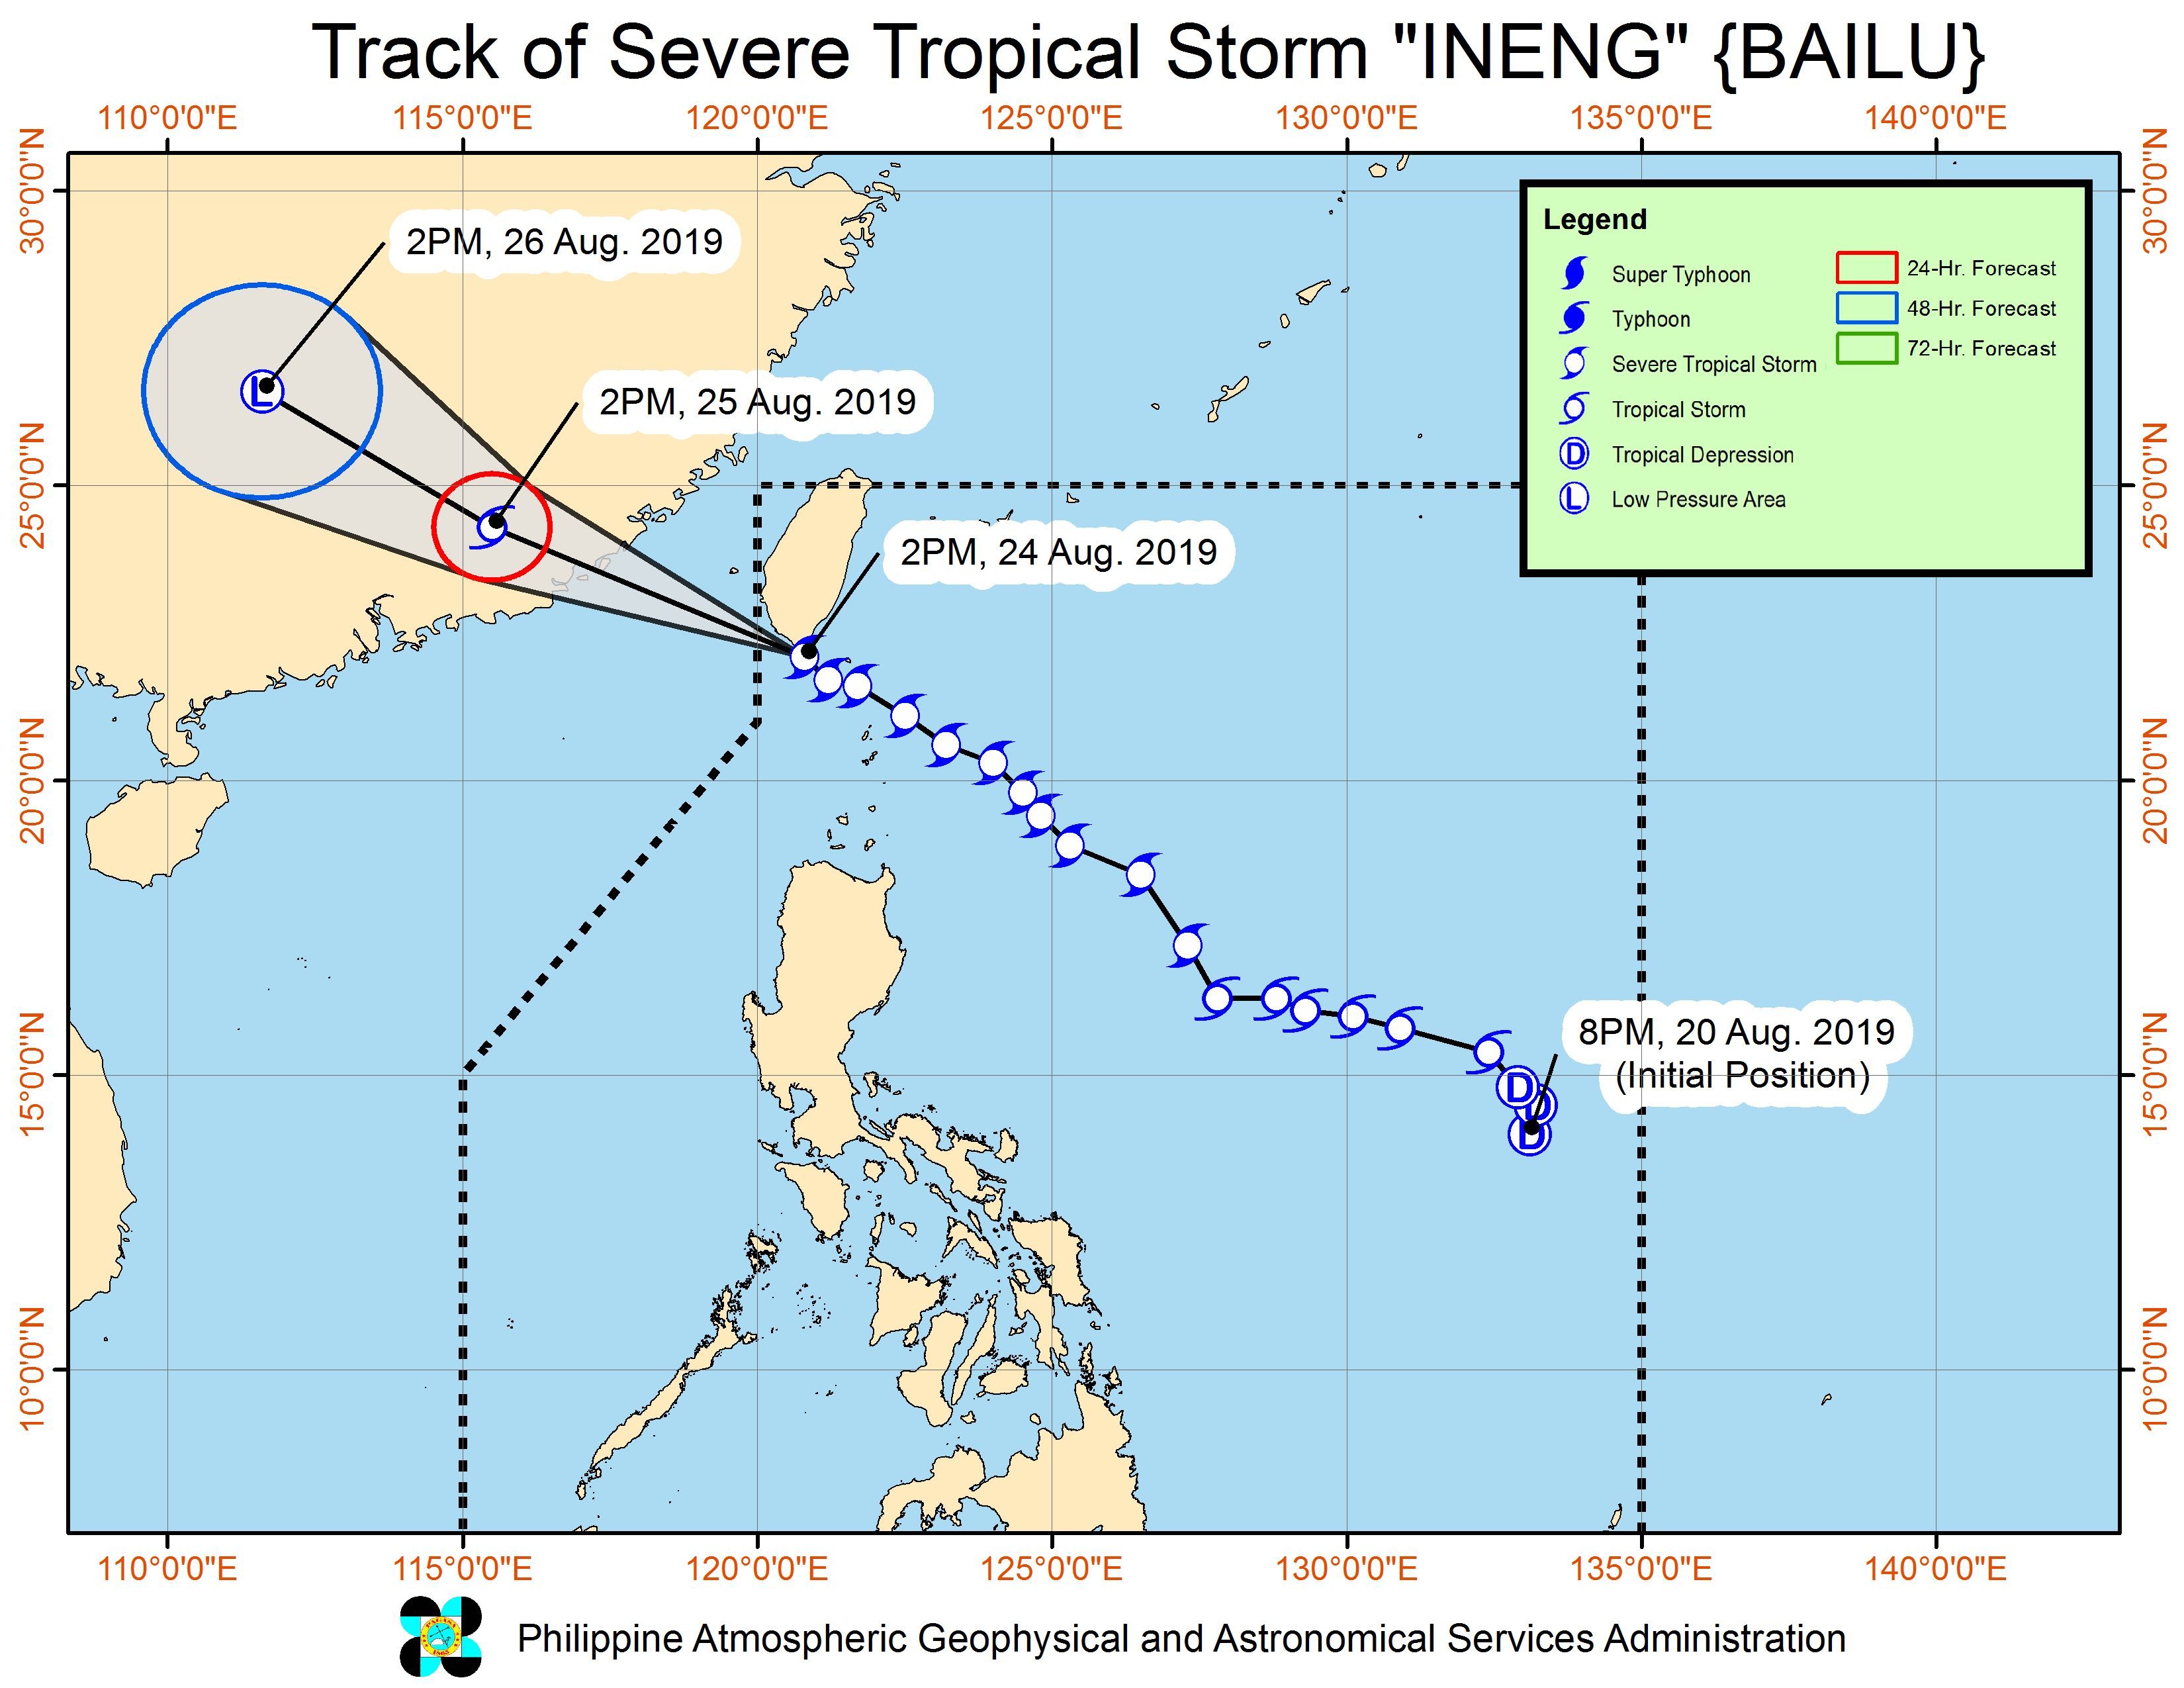 Forecast track of Severe Tropical Storm Ineng (Bailu) as of August 24, 2019, 5 pm. Image from PAGASA 